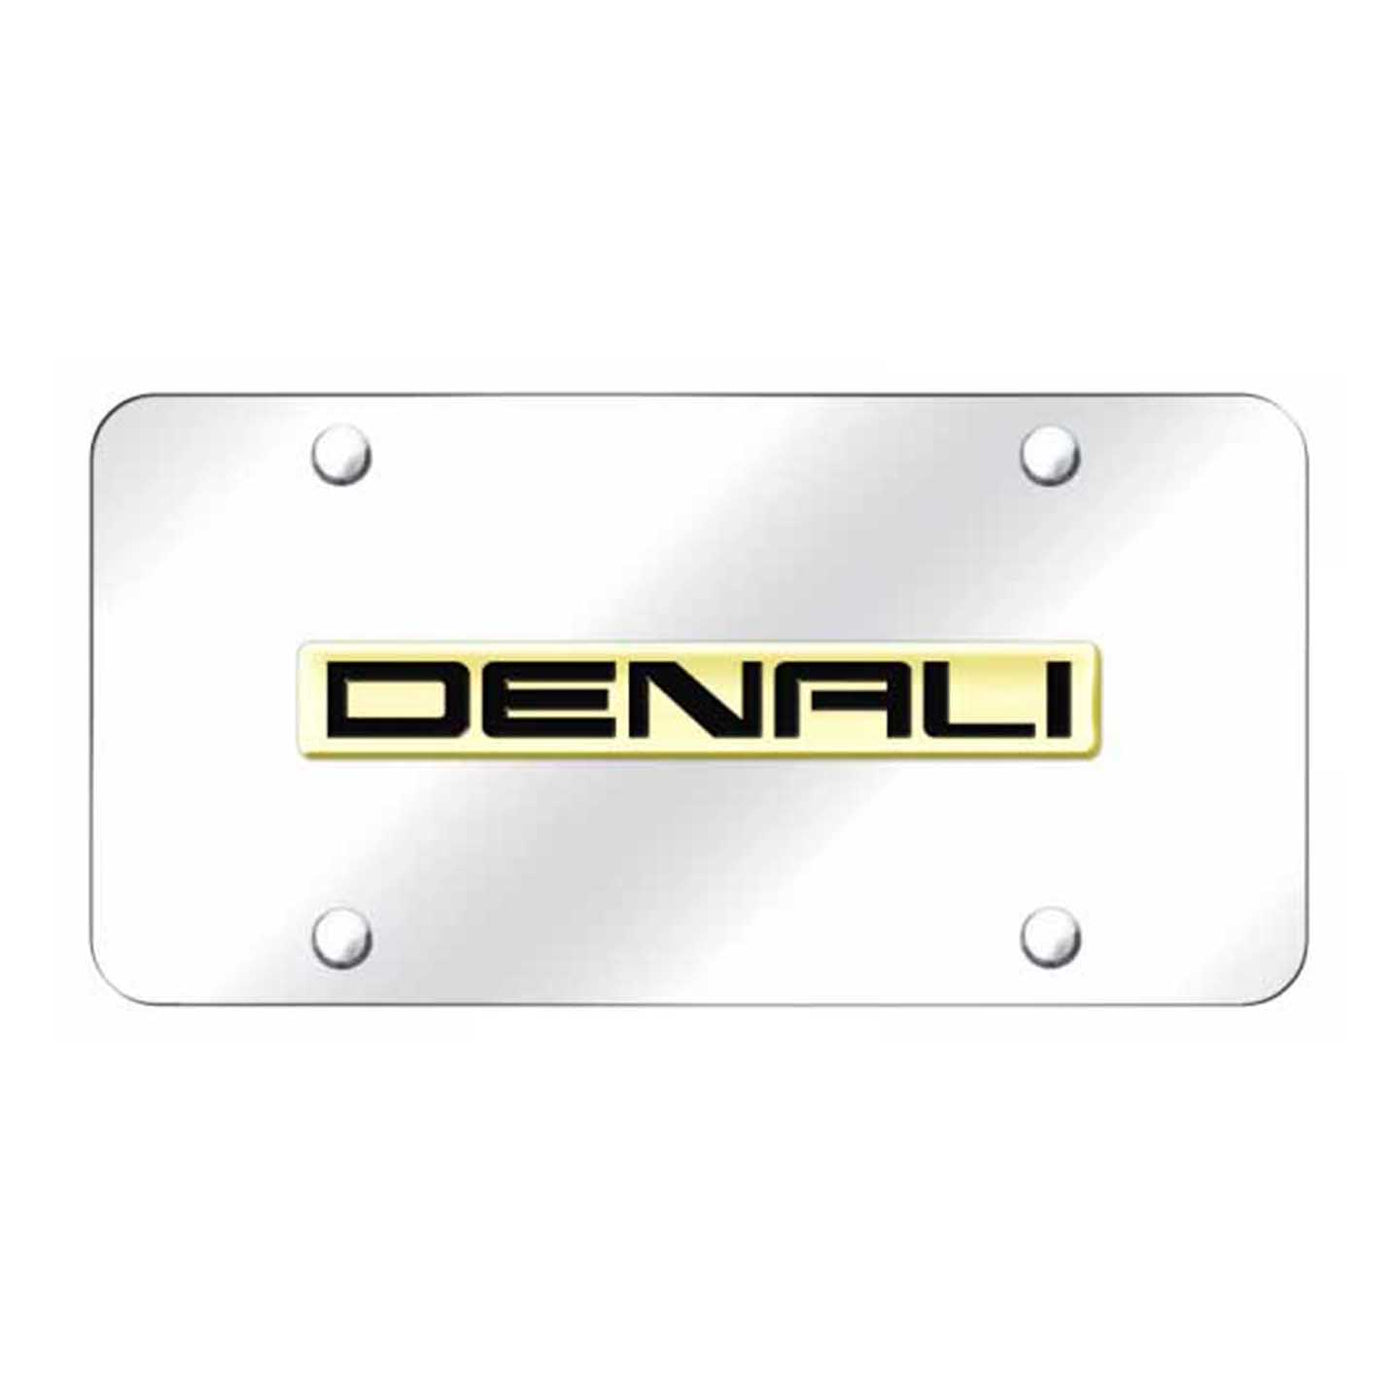 Denali Name License Plate - Gold on Mirrored